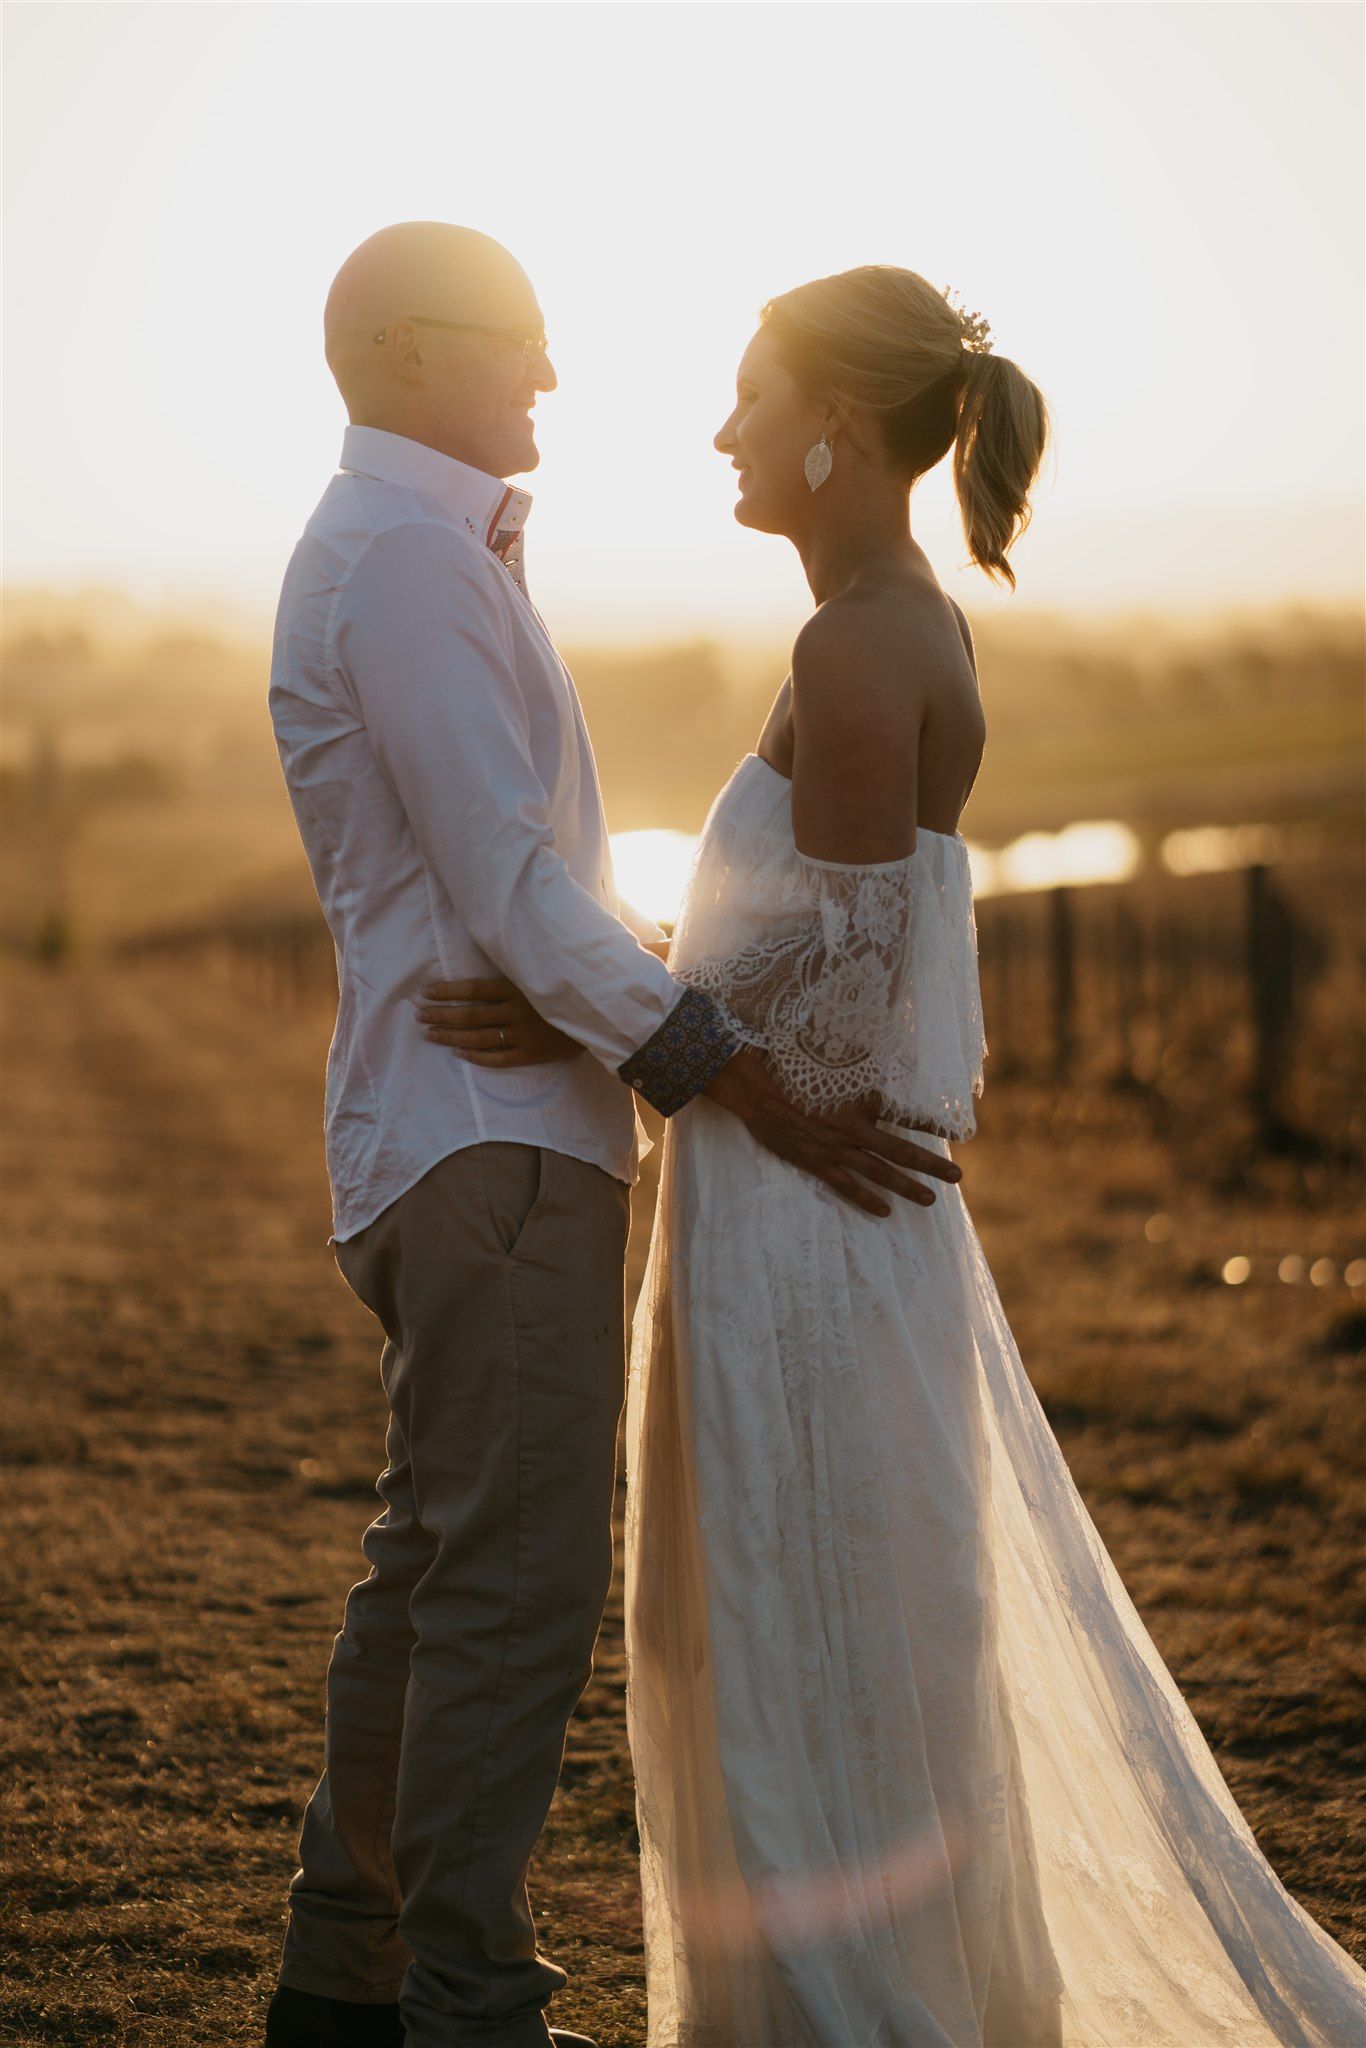 Elopements and micro weddings in the Yarra Valley? Sign us up!